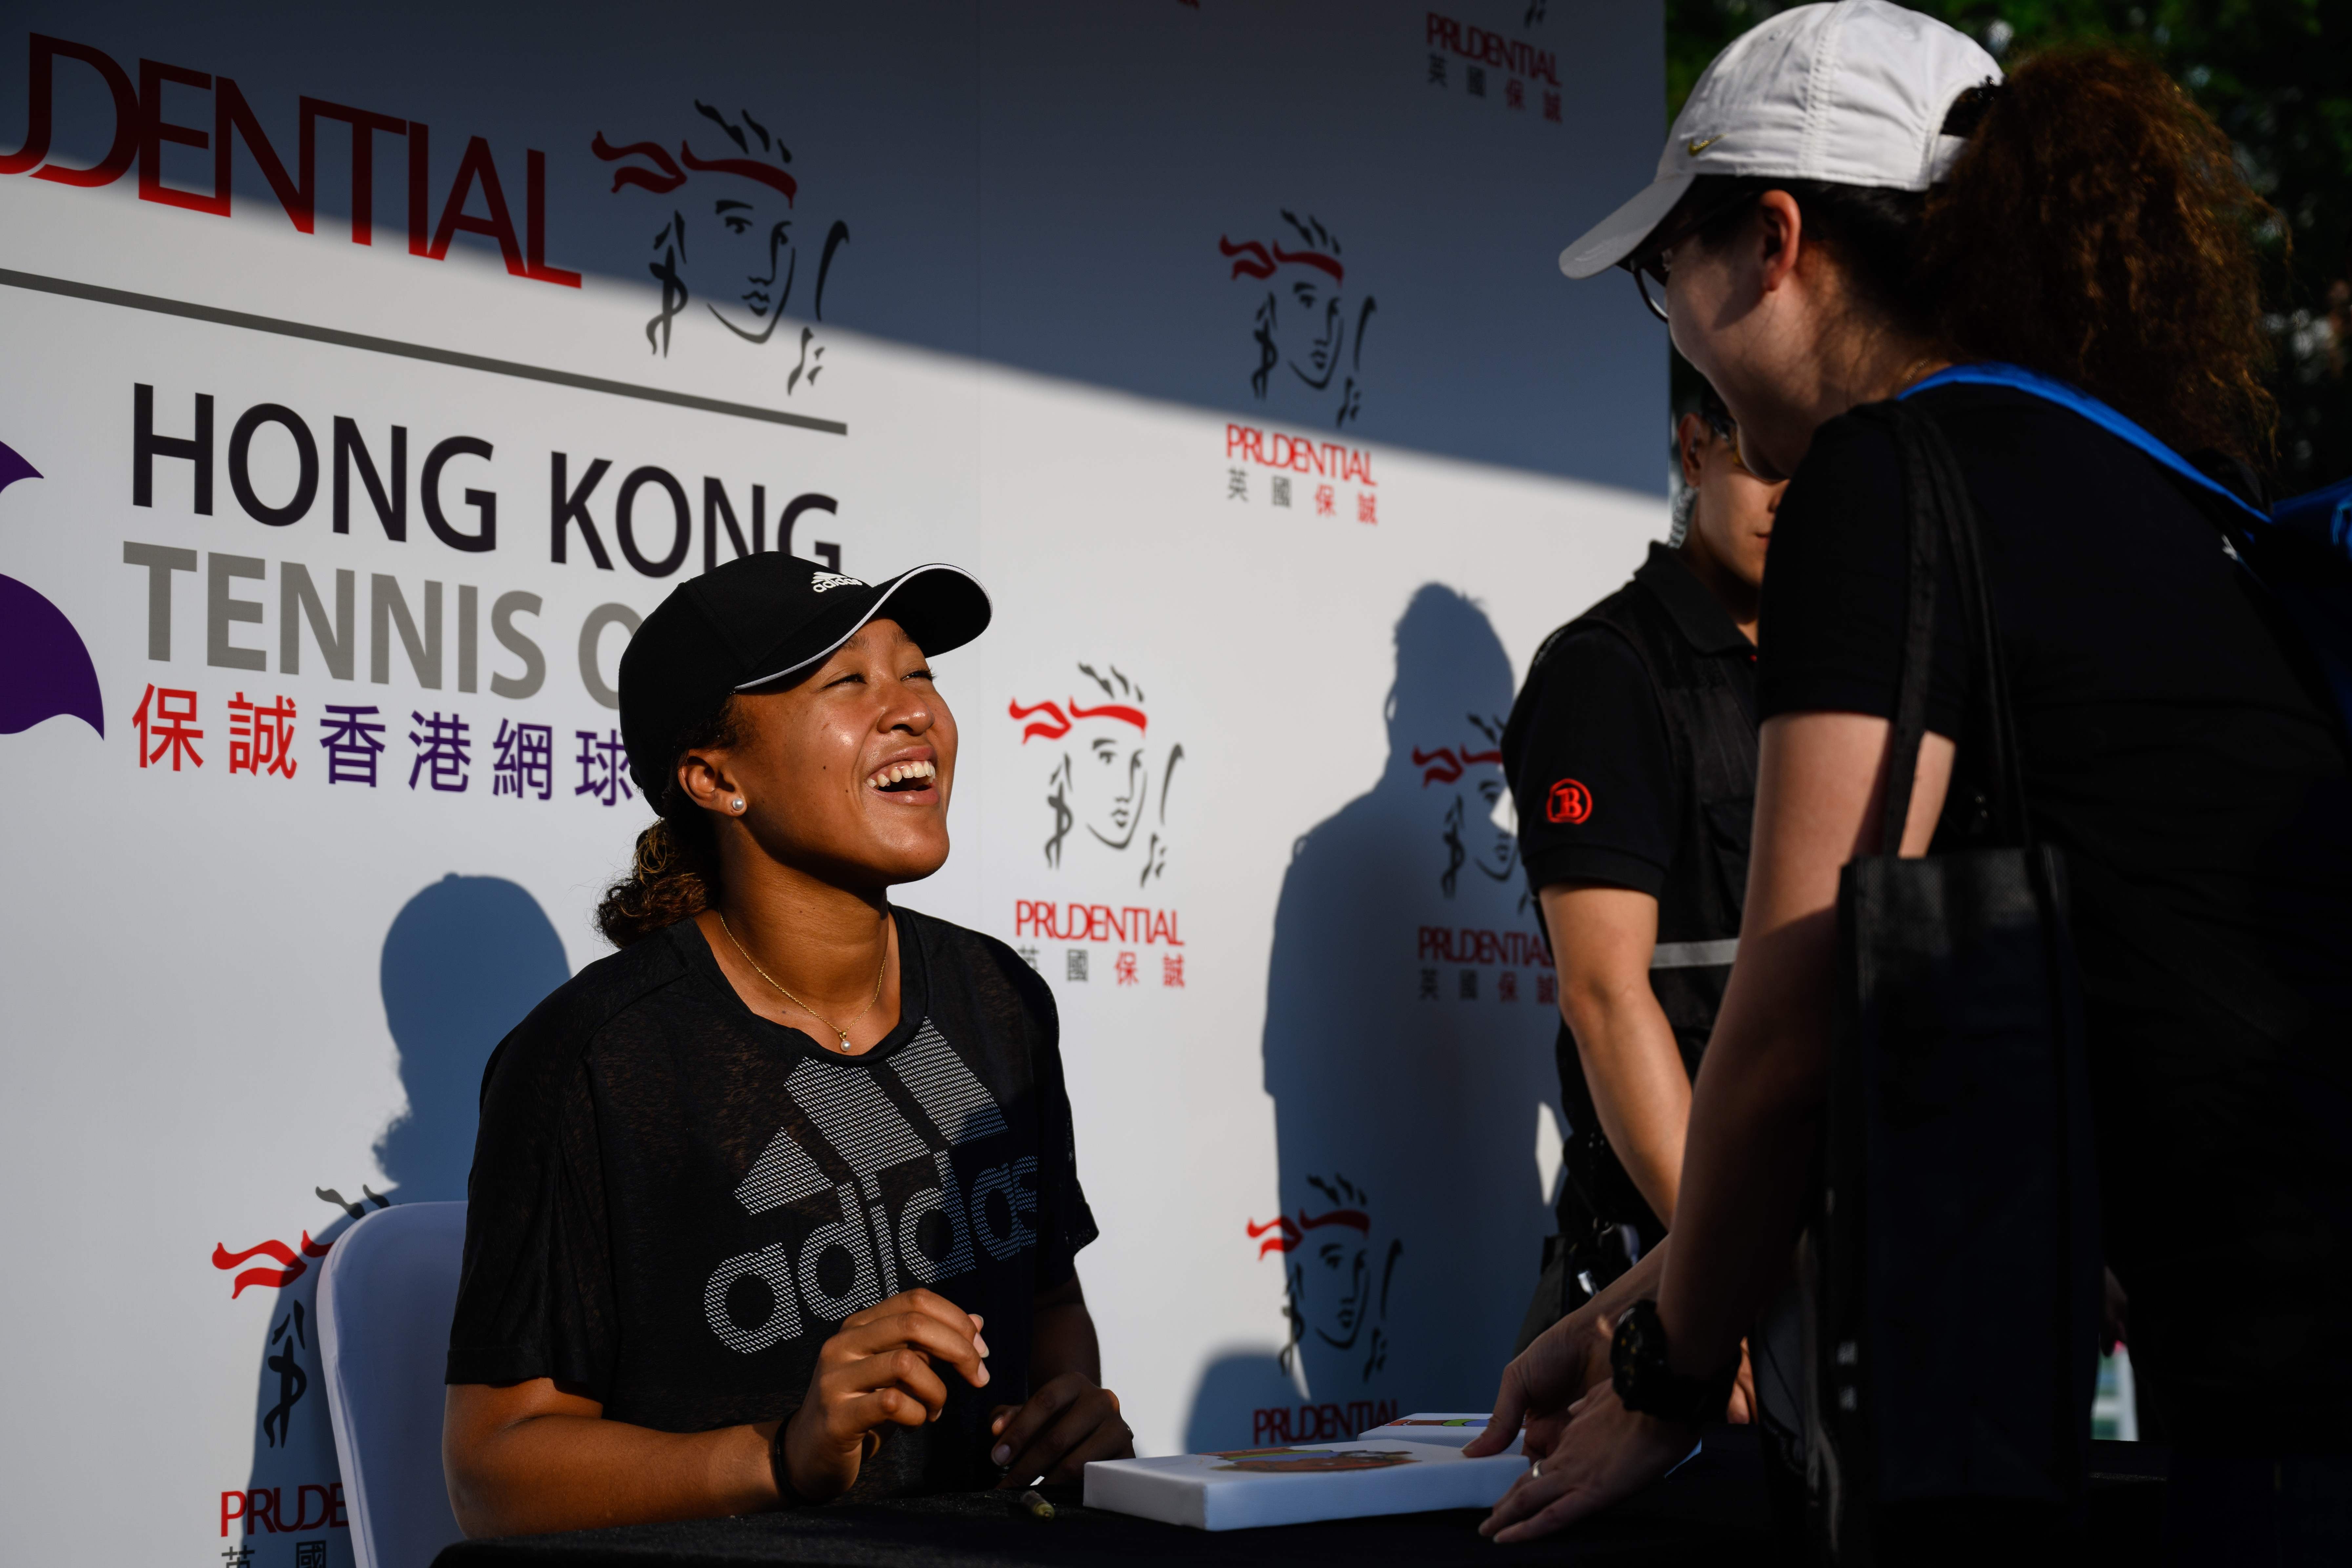 Naomi Osaka (left) smiles as she meets fans and signs autographs at the Hong Kong Open. Photo: AFP